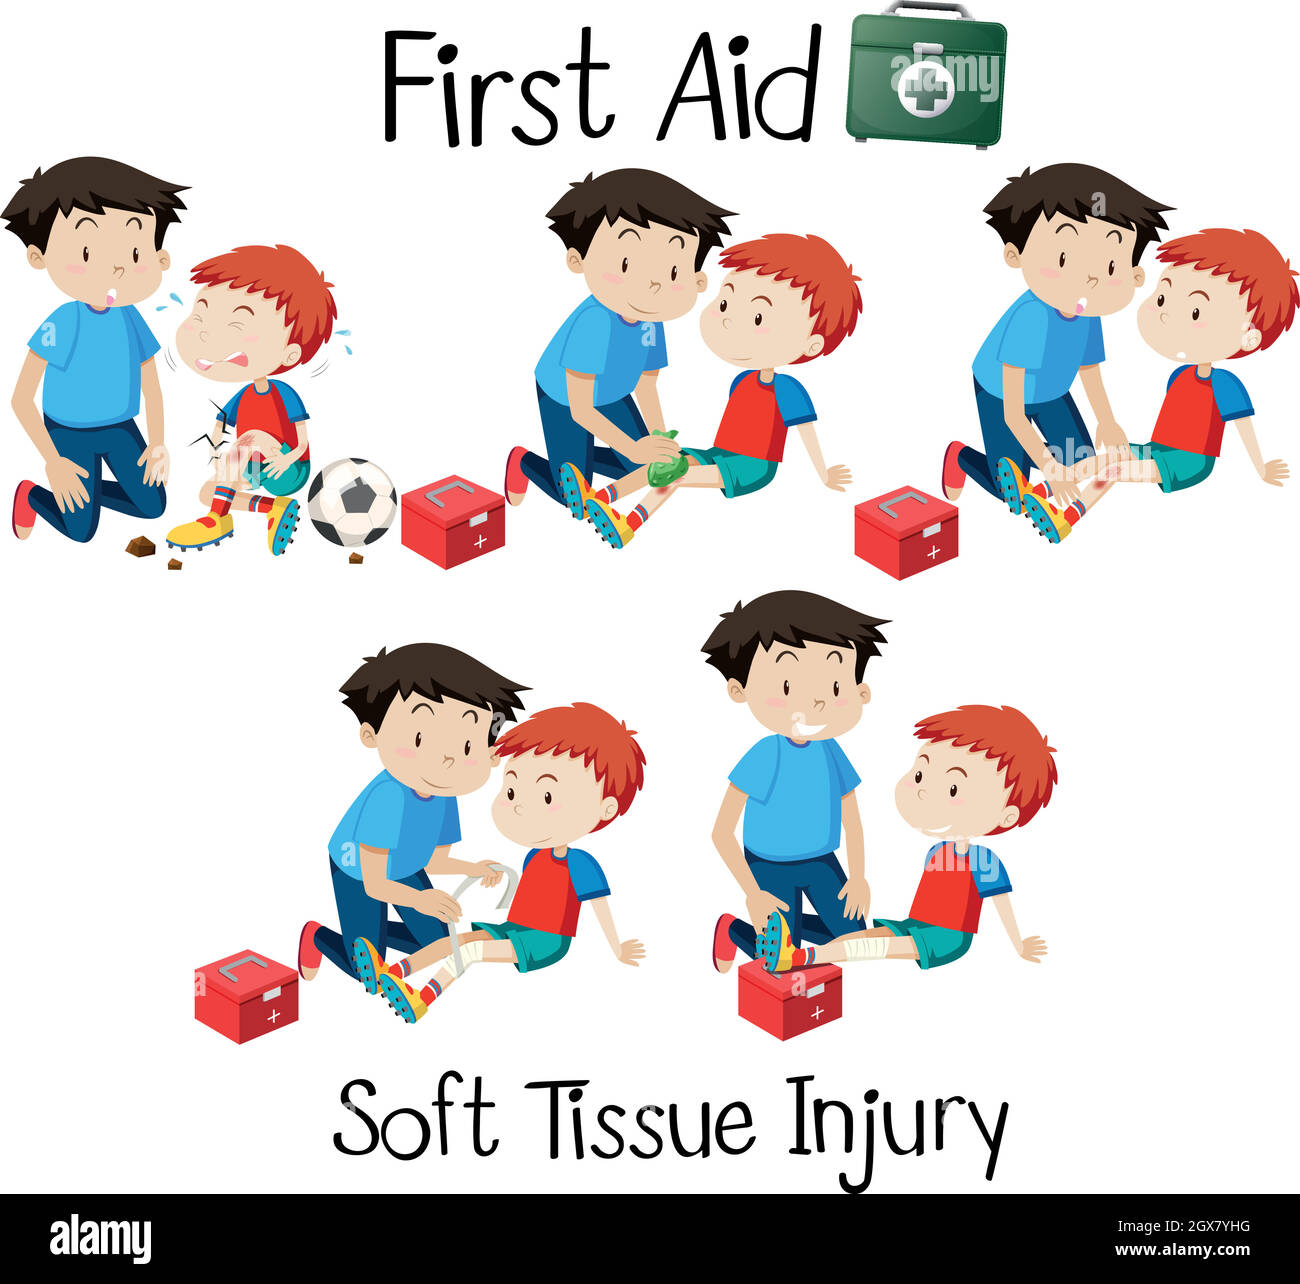 First aid soft tissue injury Stock Vector